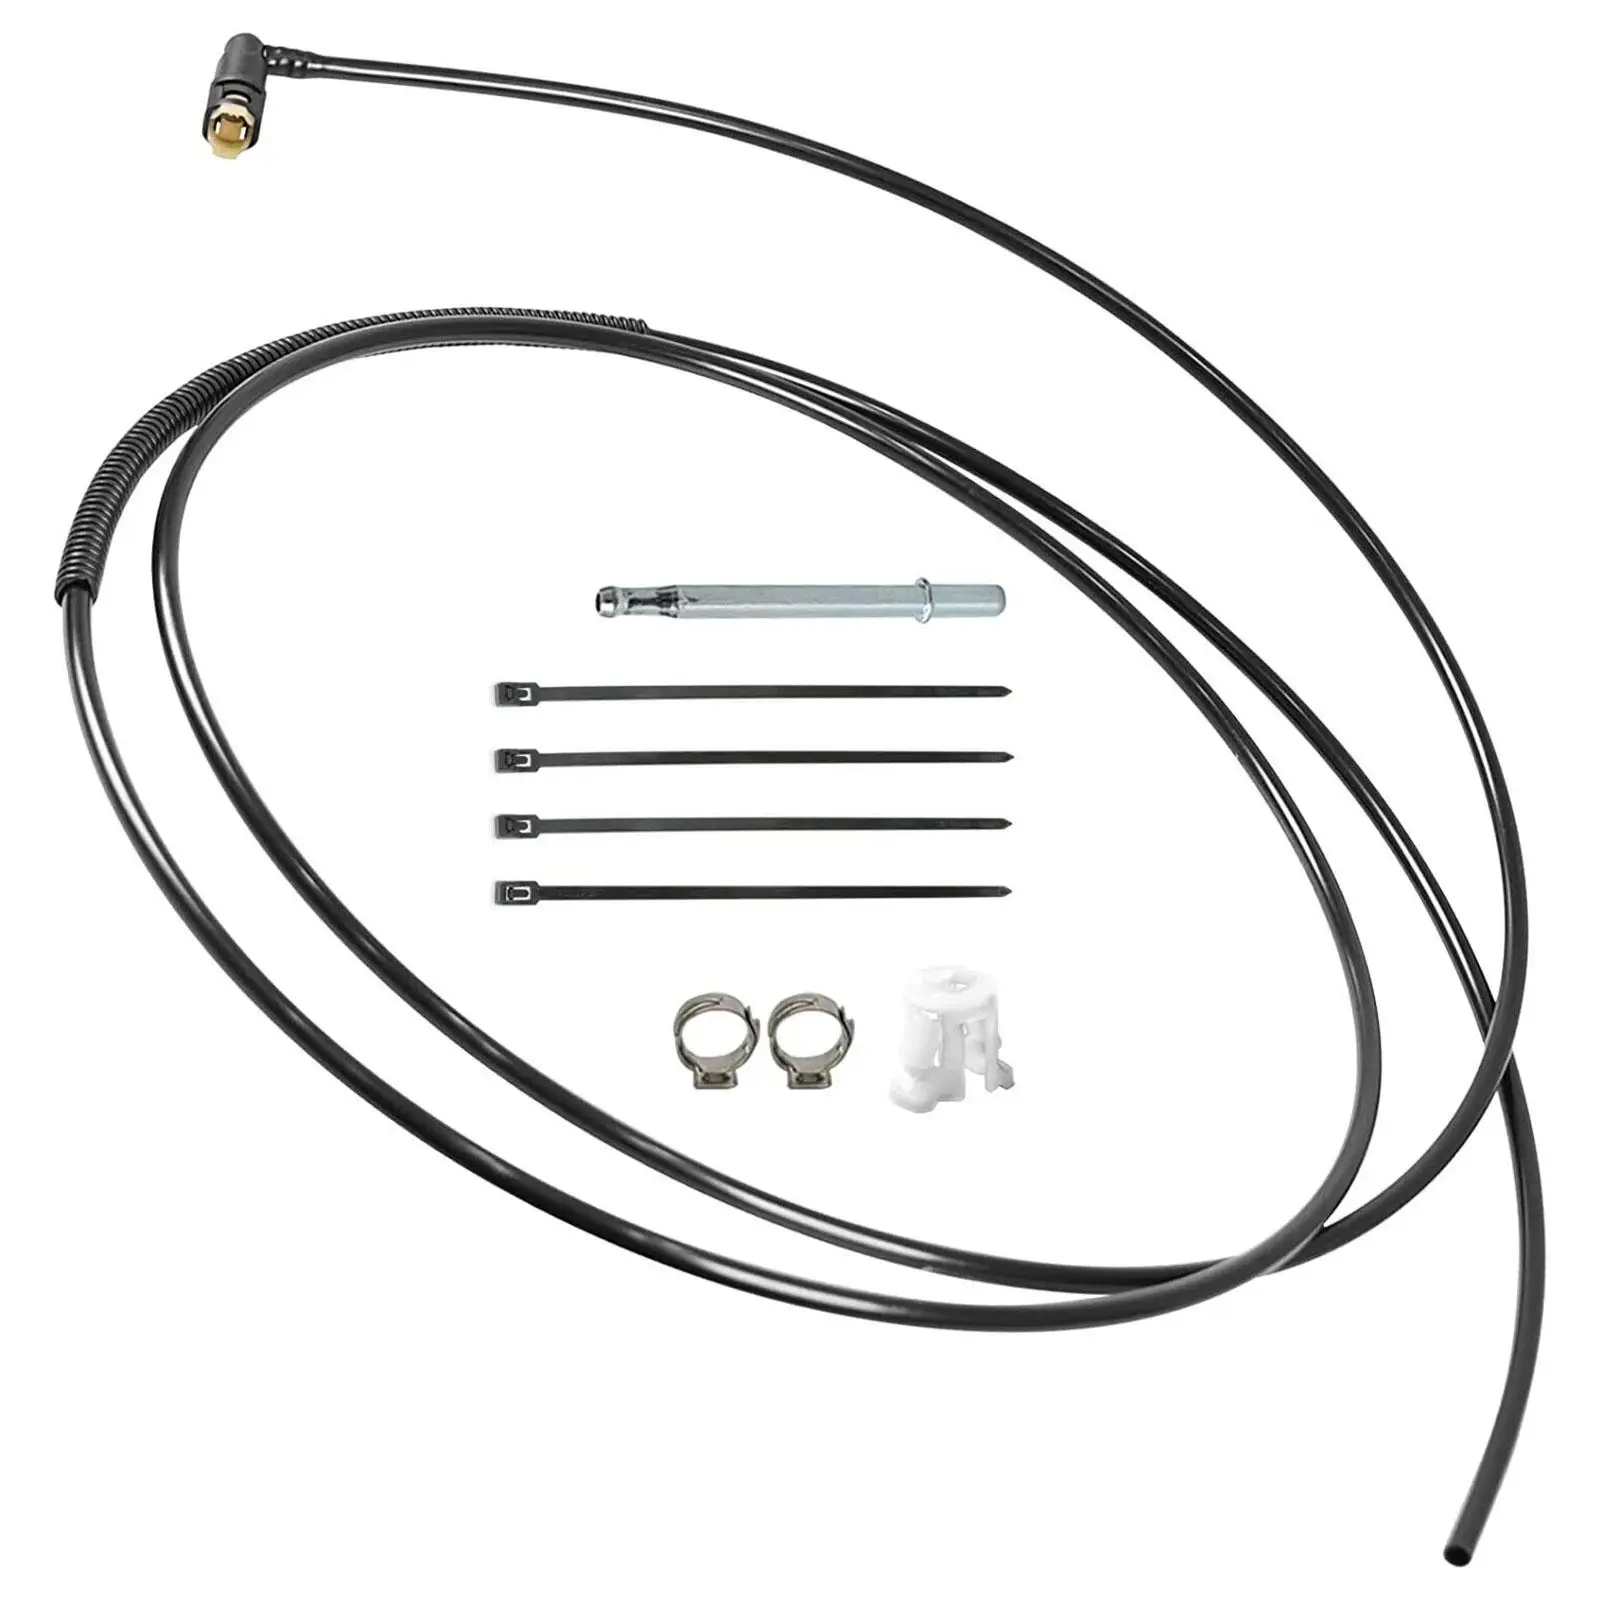 Pick up Gas Fuel Line Fl-Fg0212 Durable Car Accessories High Performance for